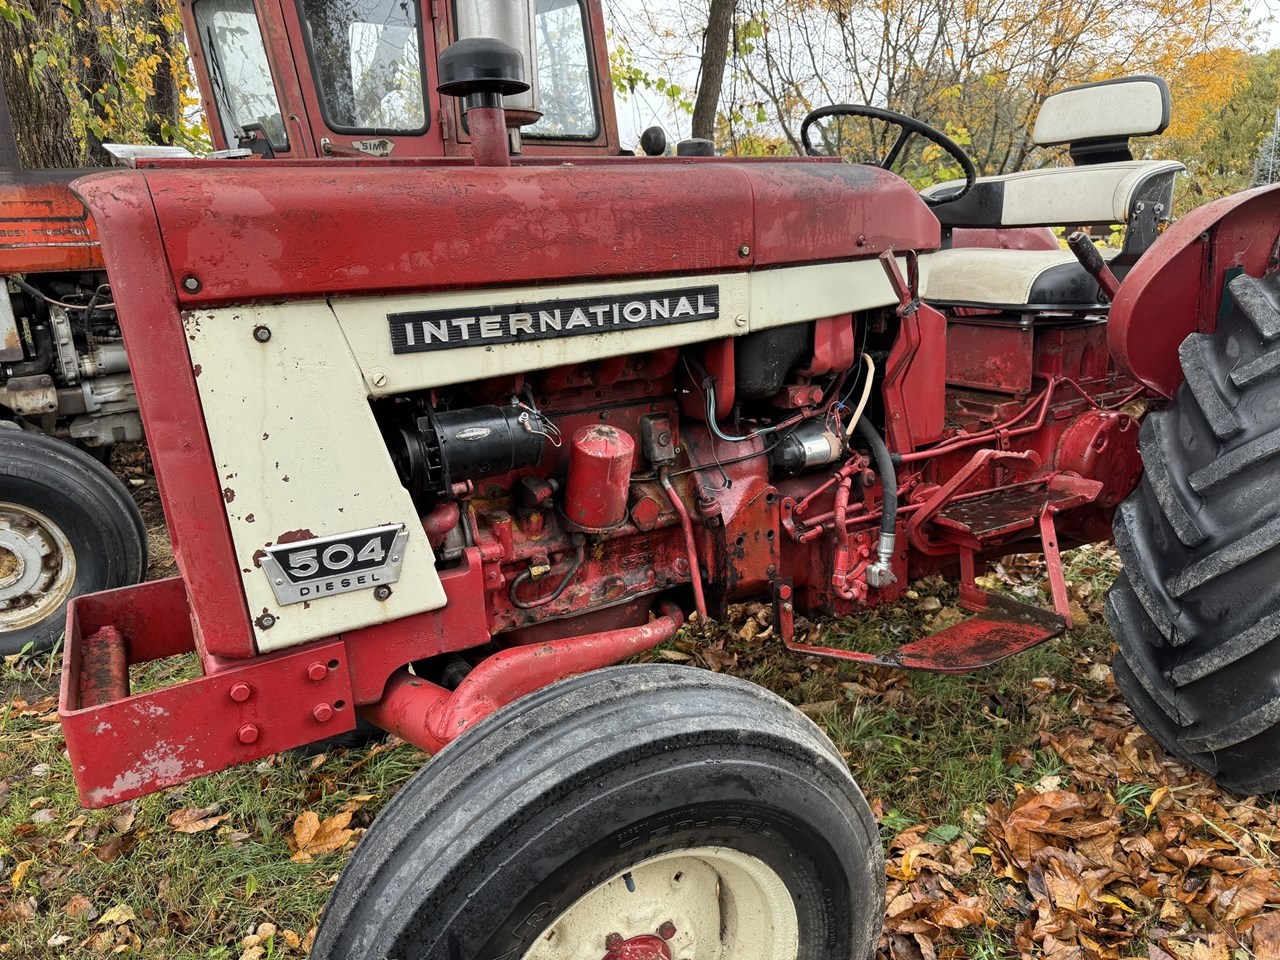 1965 International 504 Tractor - Utility For Sale